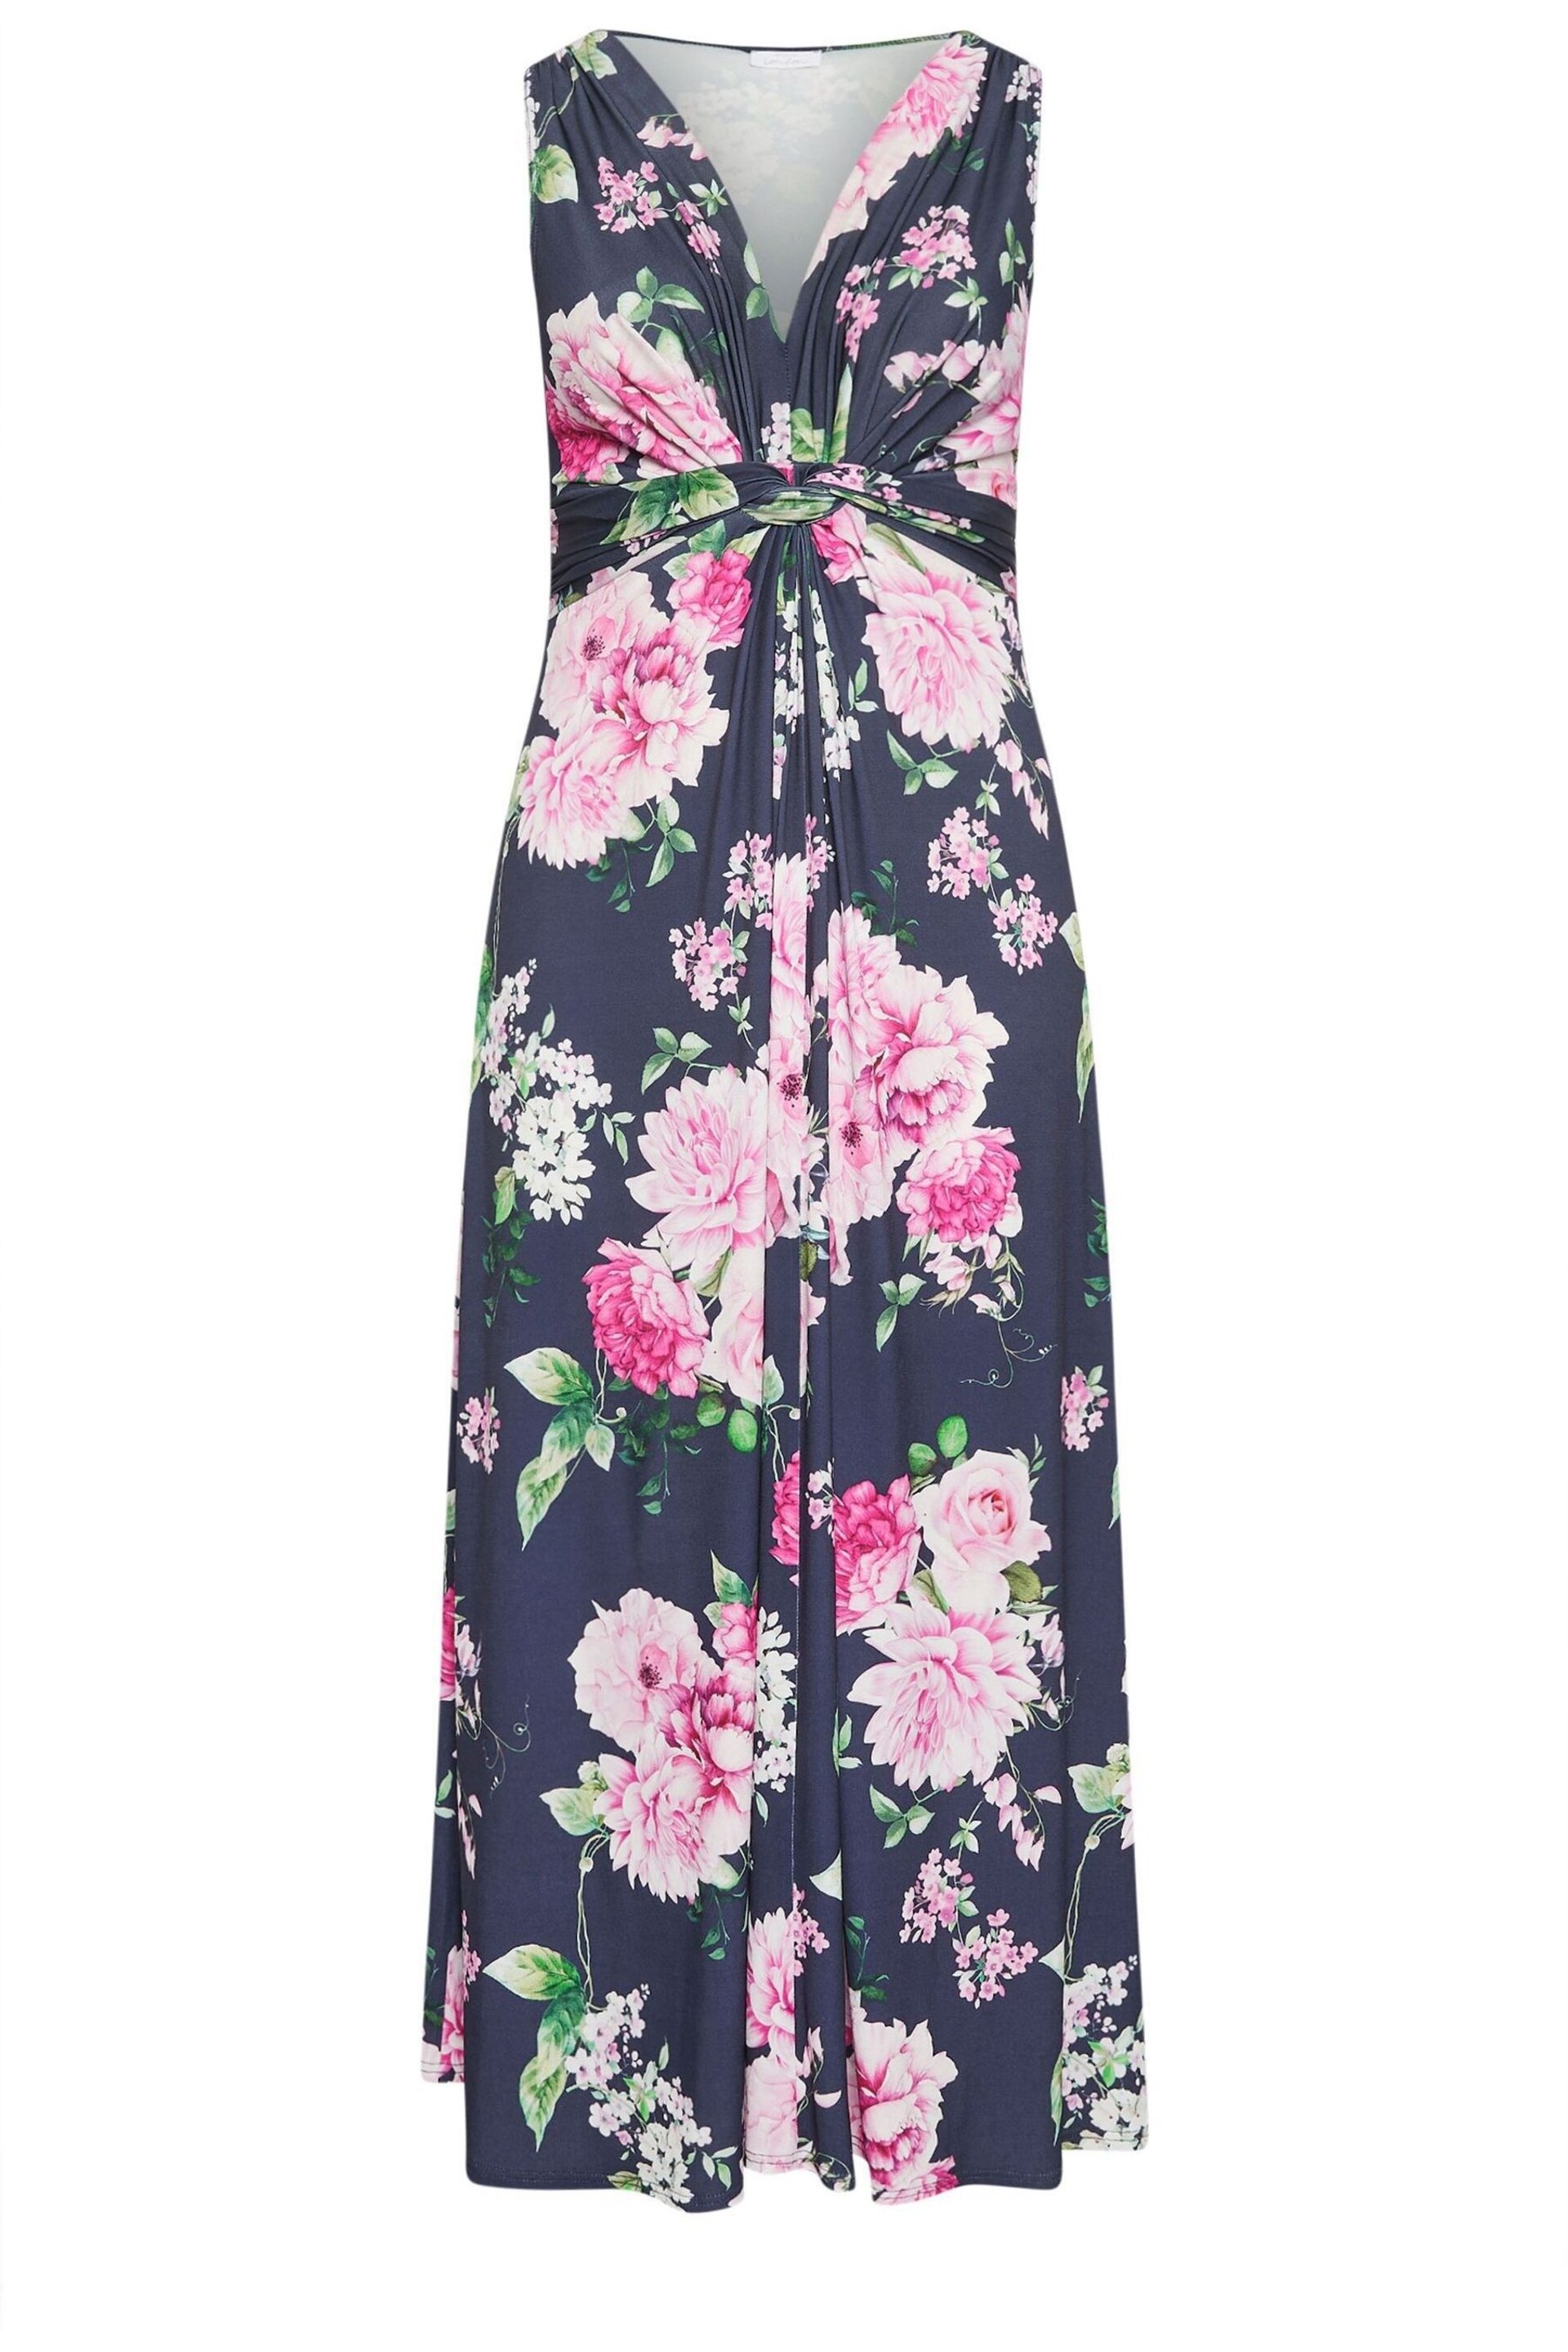 YOURS LONDON Curve Blue Floral Print Knot Front Maxi Dress - Image 2 of 2